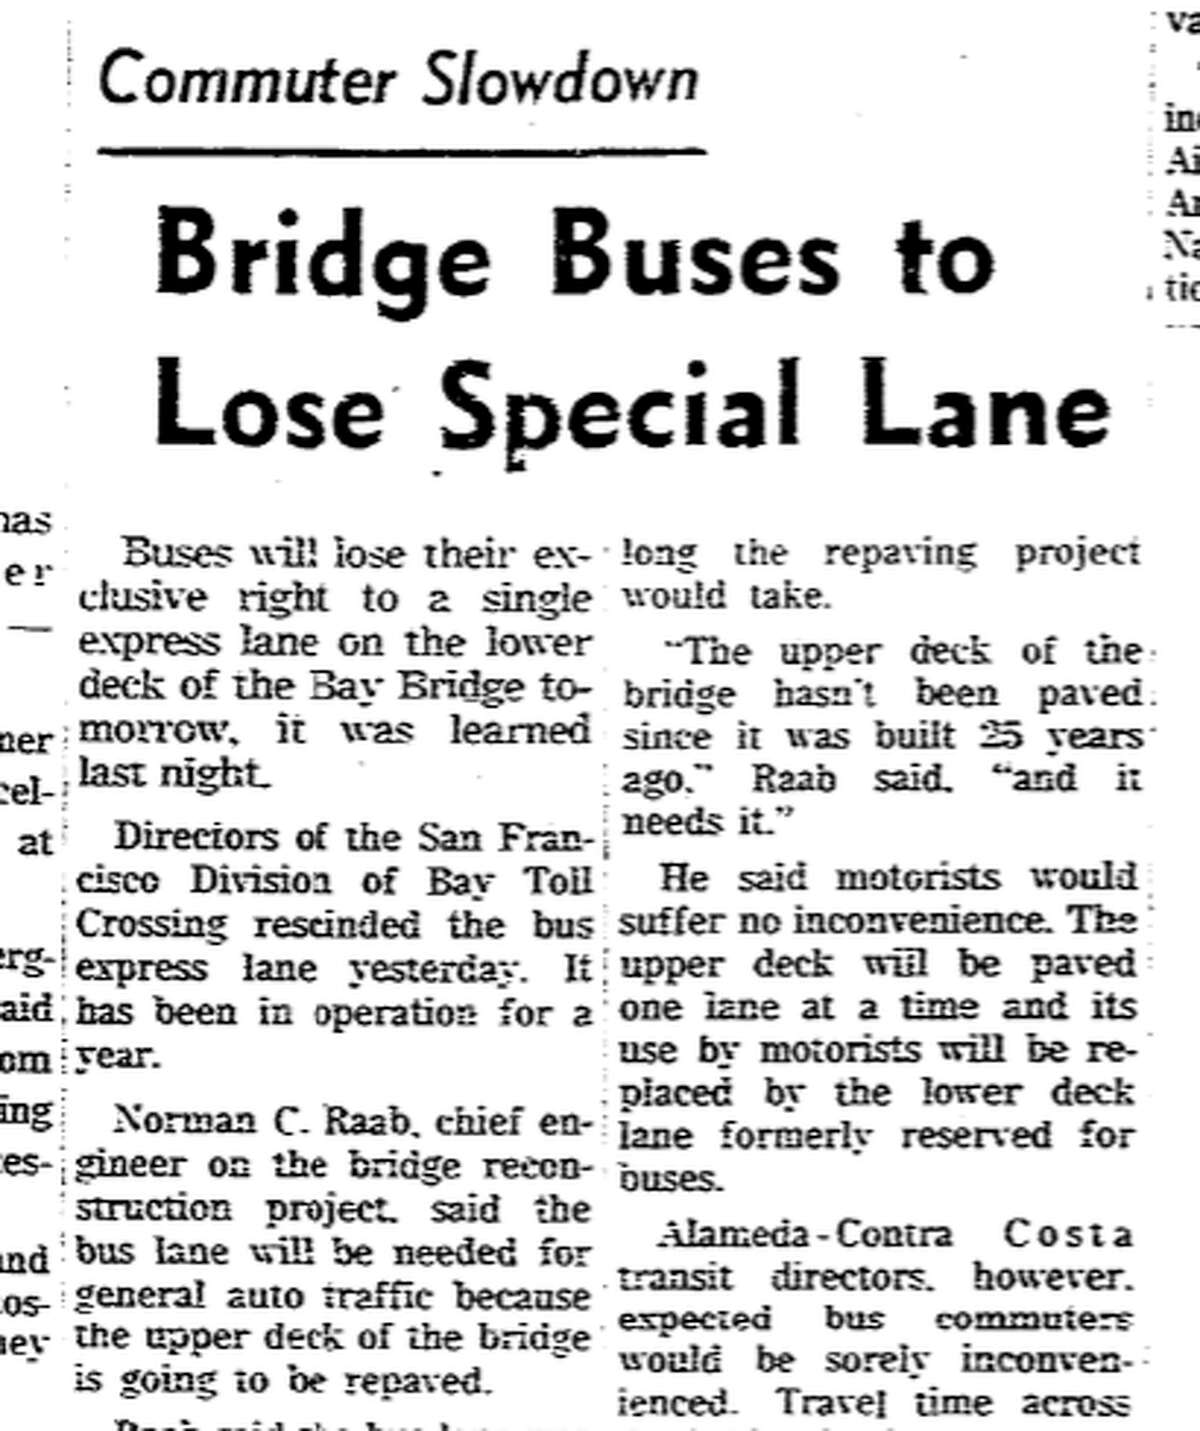 The dedicated bus lane was eliminated on Jan. 31, 1963, much to the chagrin of bus riders who liked the speedier commute.